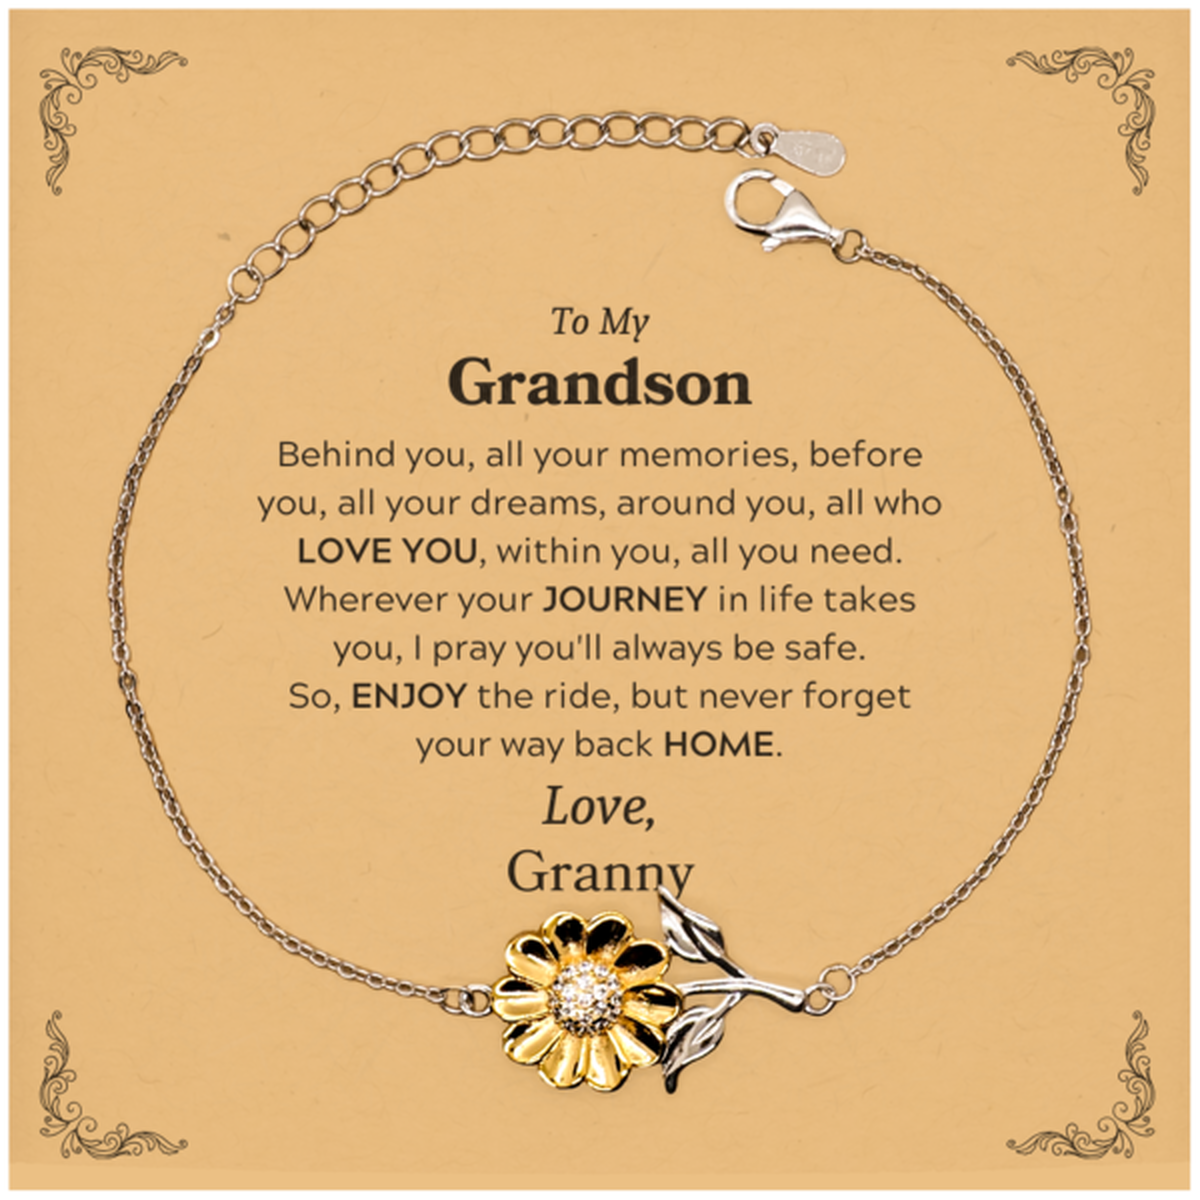 To My Grandson Graduation Gifts from Granny, Grandson Sunflower Bracelet Christmas Birthday Gifts for Grandson Behind you, all your memories, before you, all your dreams. Love, Granny